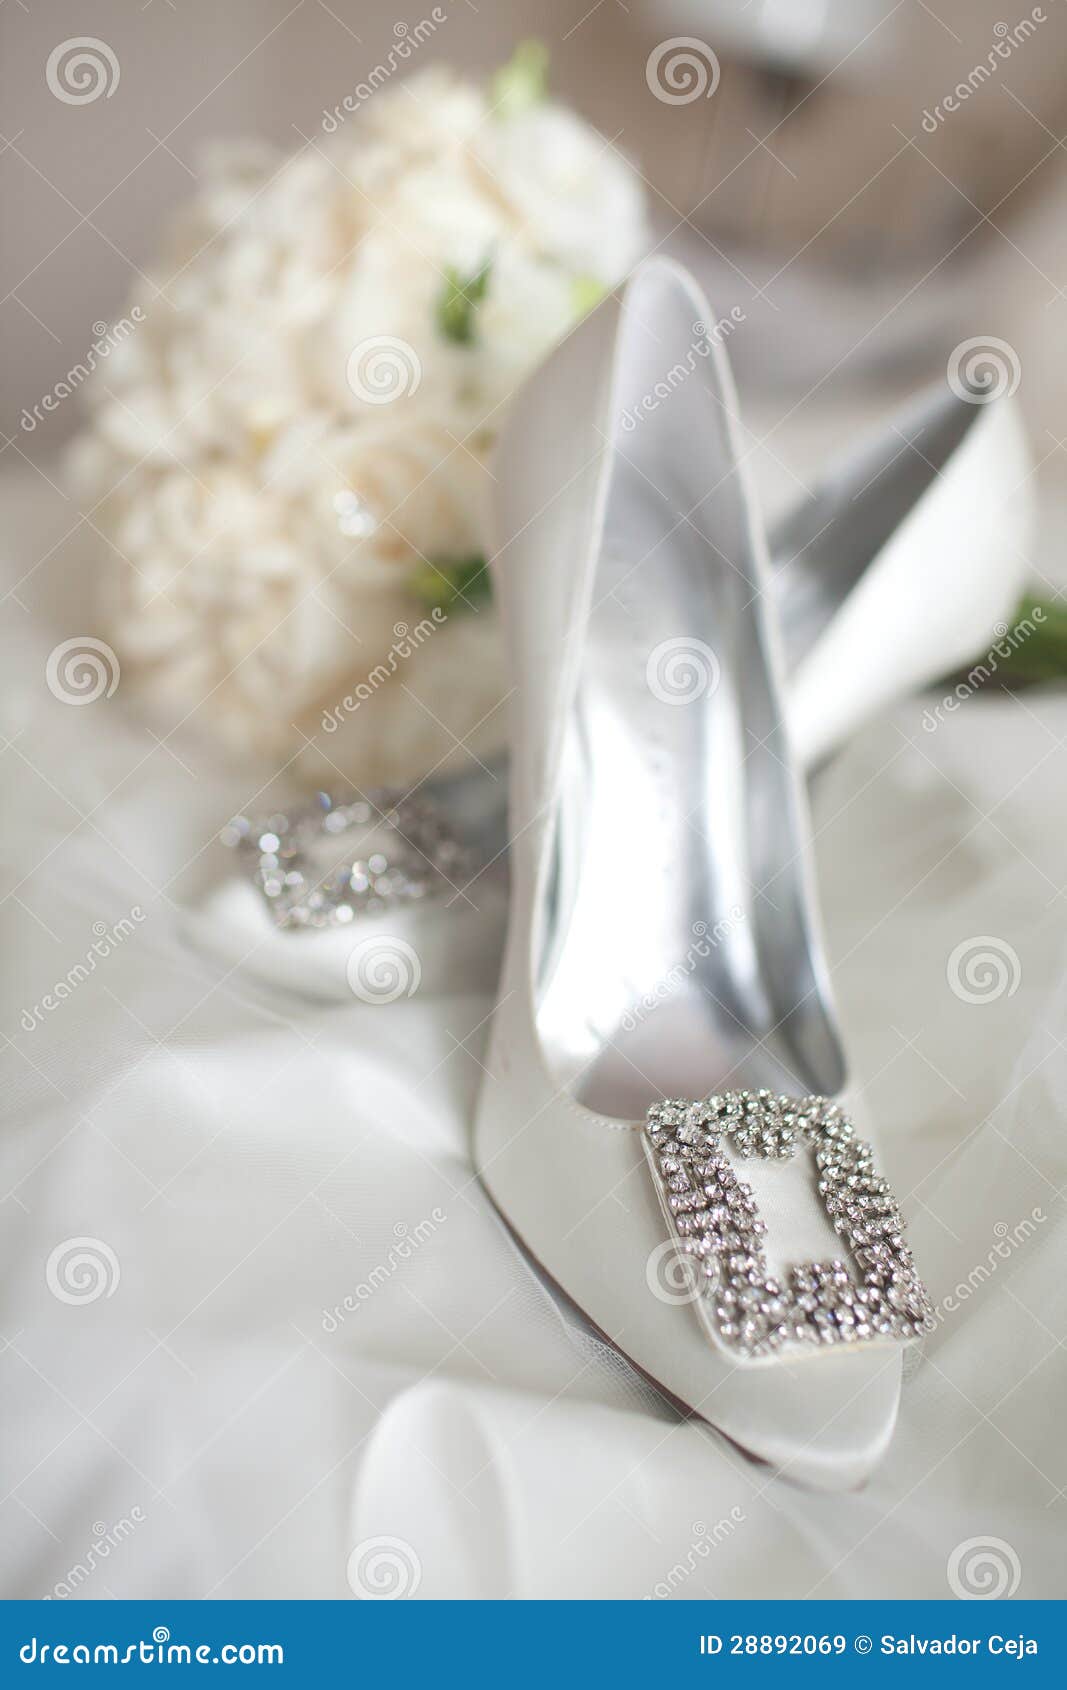 Wedding Shoes White Rose Bouquet Stock Image - Image of bouquet ...